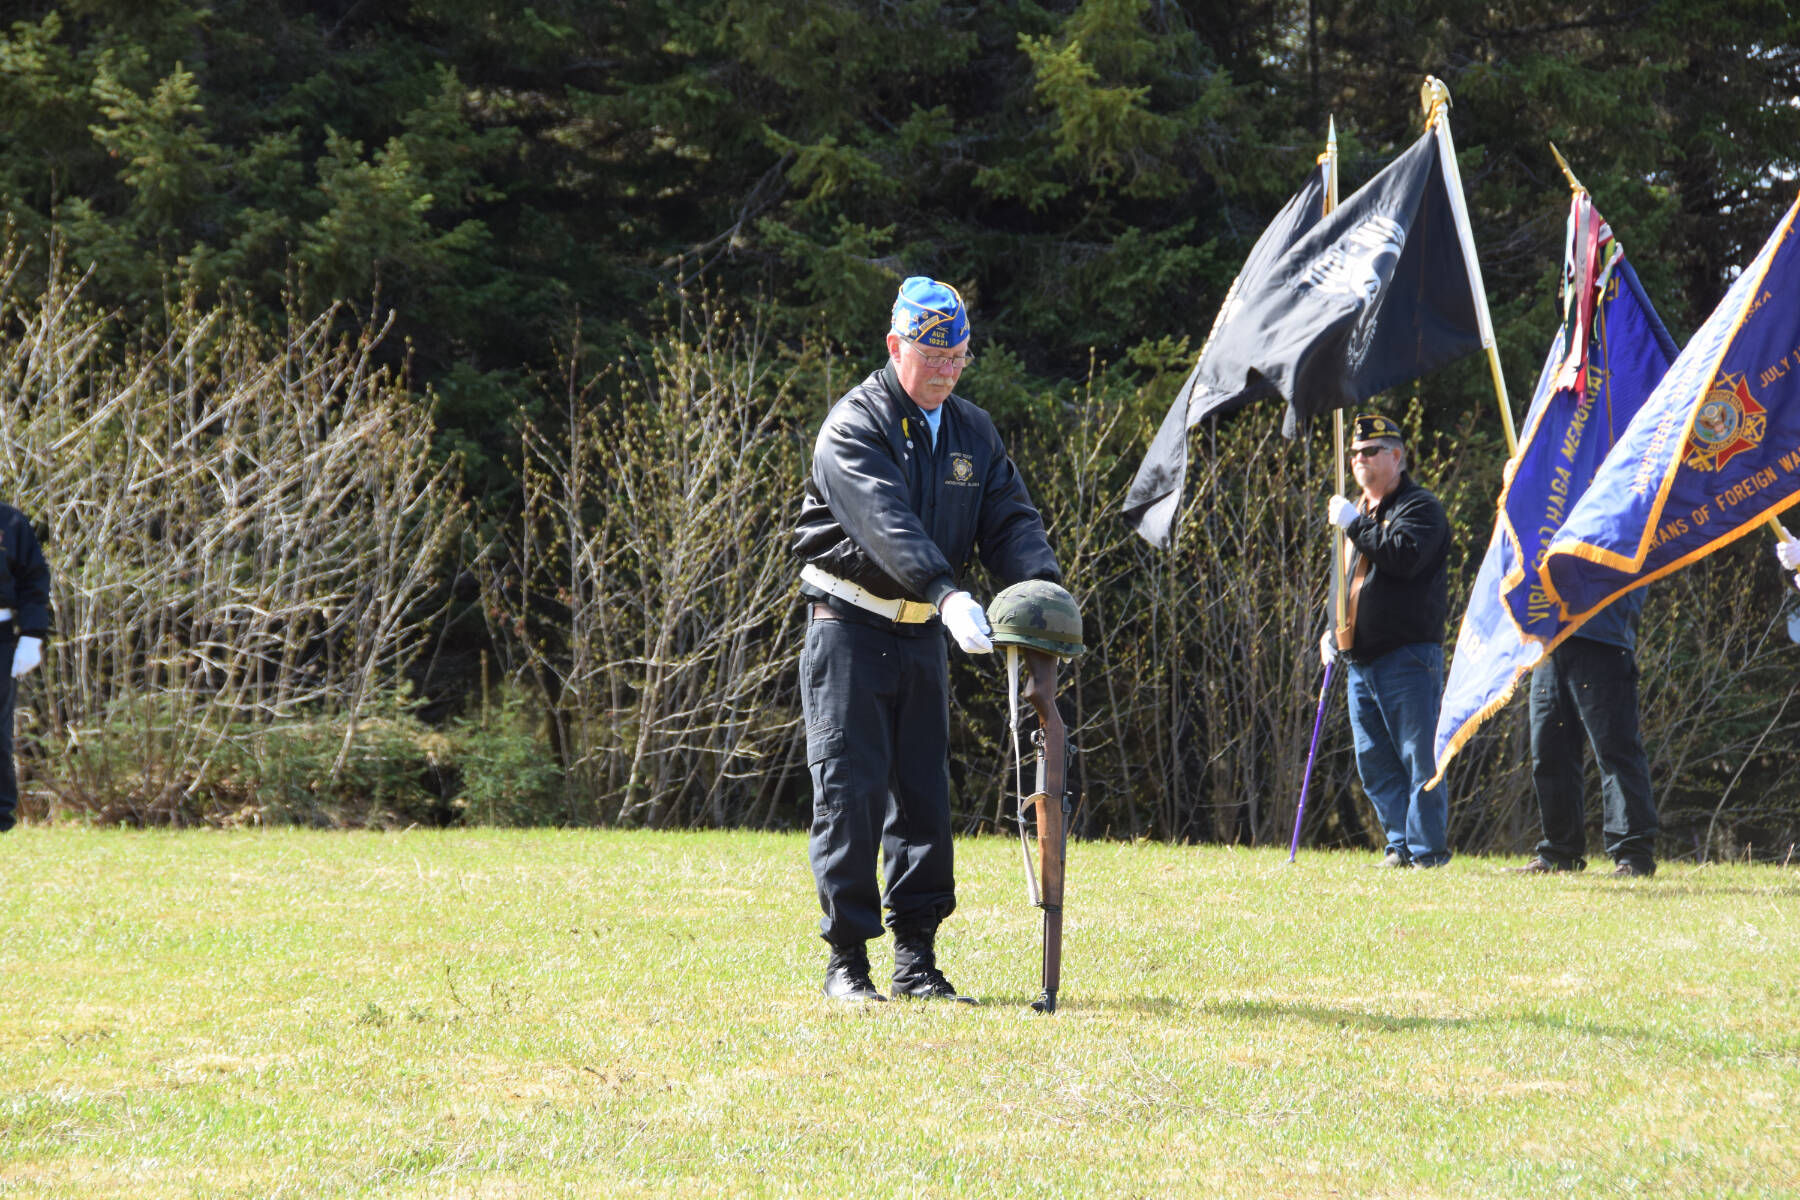 VFW Post 10221 member Eric Henley performs the battlefield cross during a Memorial Day service held at the Anchor Point Kallman Cemetery on Monday, May 29, 2023 in Anchor Point, Alaska. (Delcenia Cosman/Homer News)